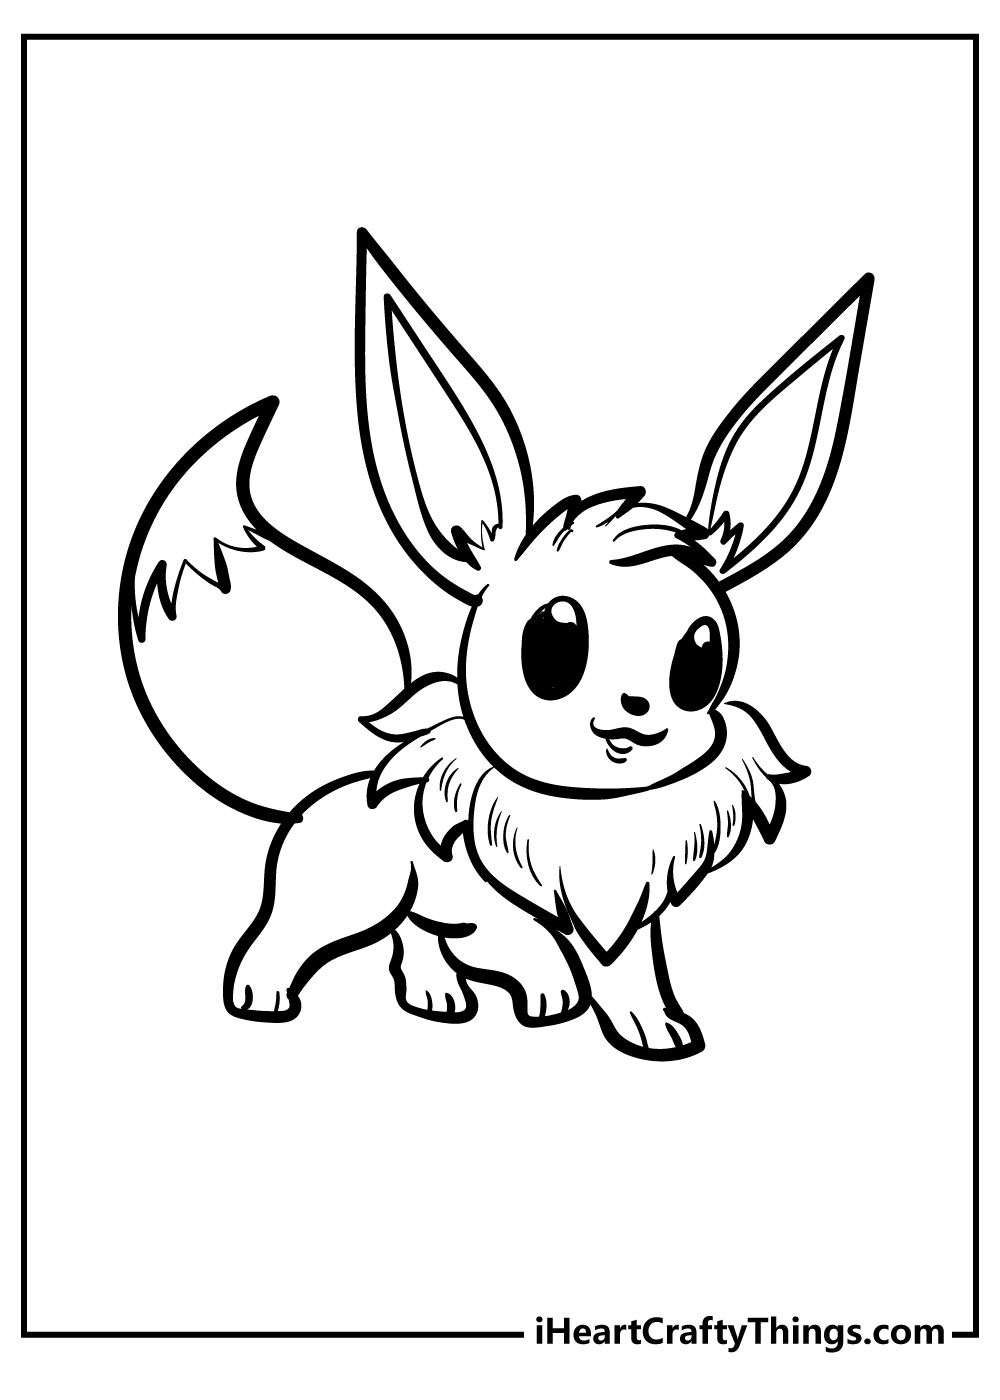 black and white eevee pokemon coloring pages